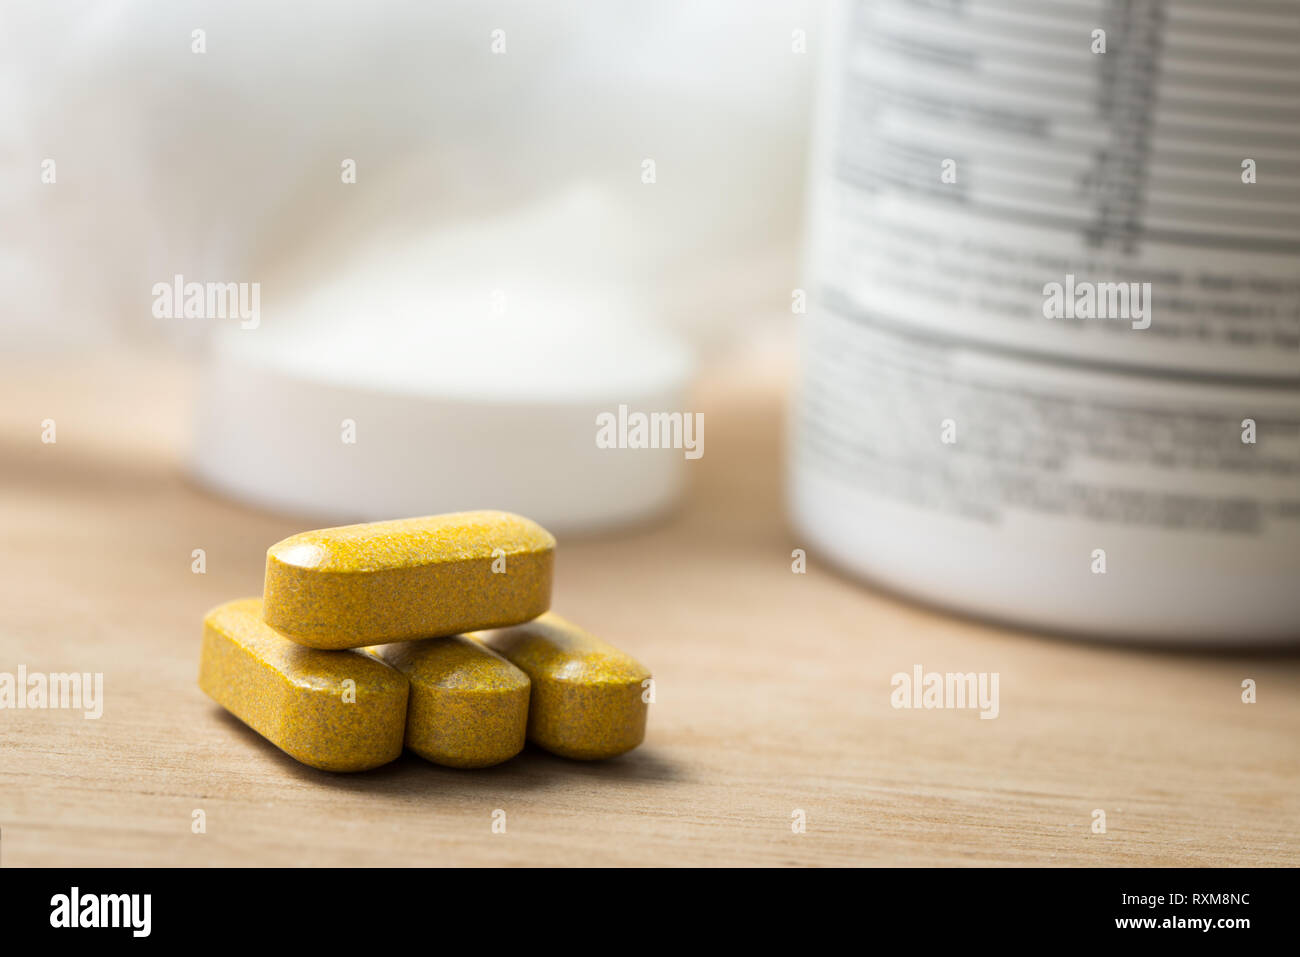 Turmeric and ginger root dietary supplement tablets Stock Photo